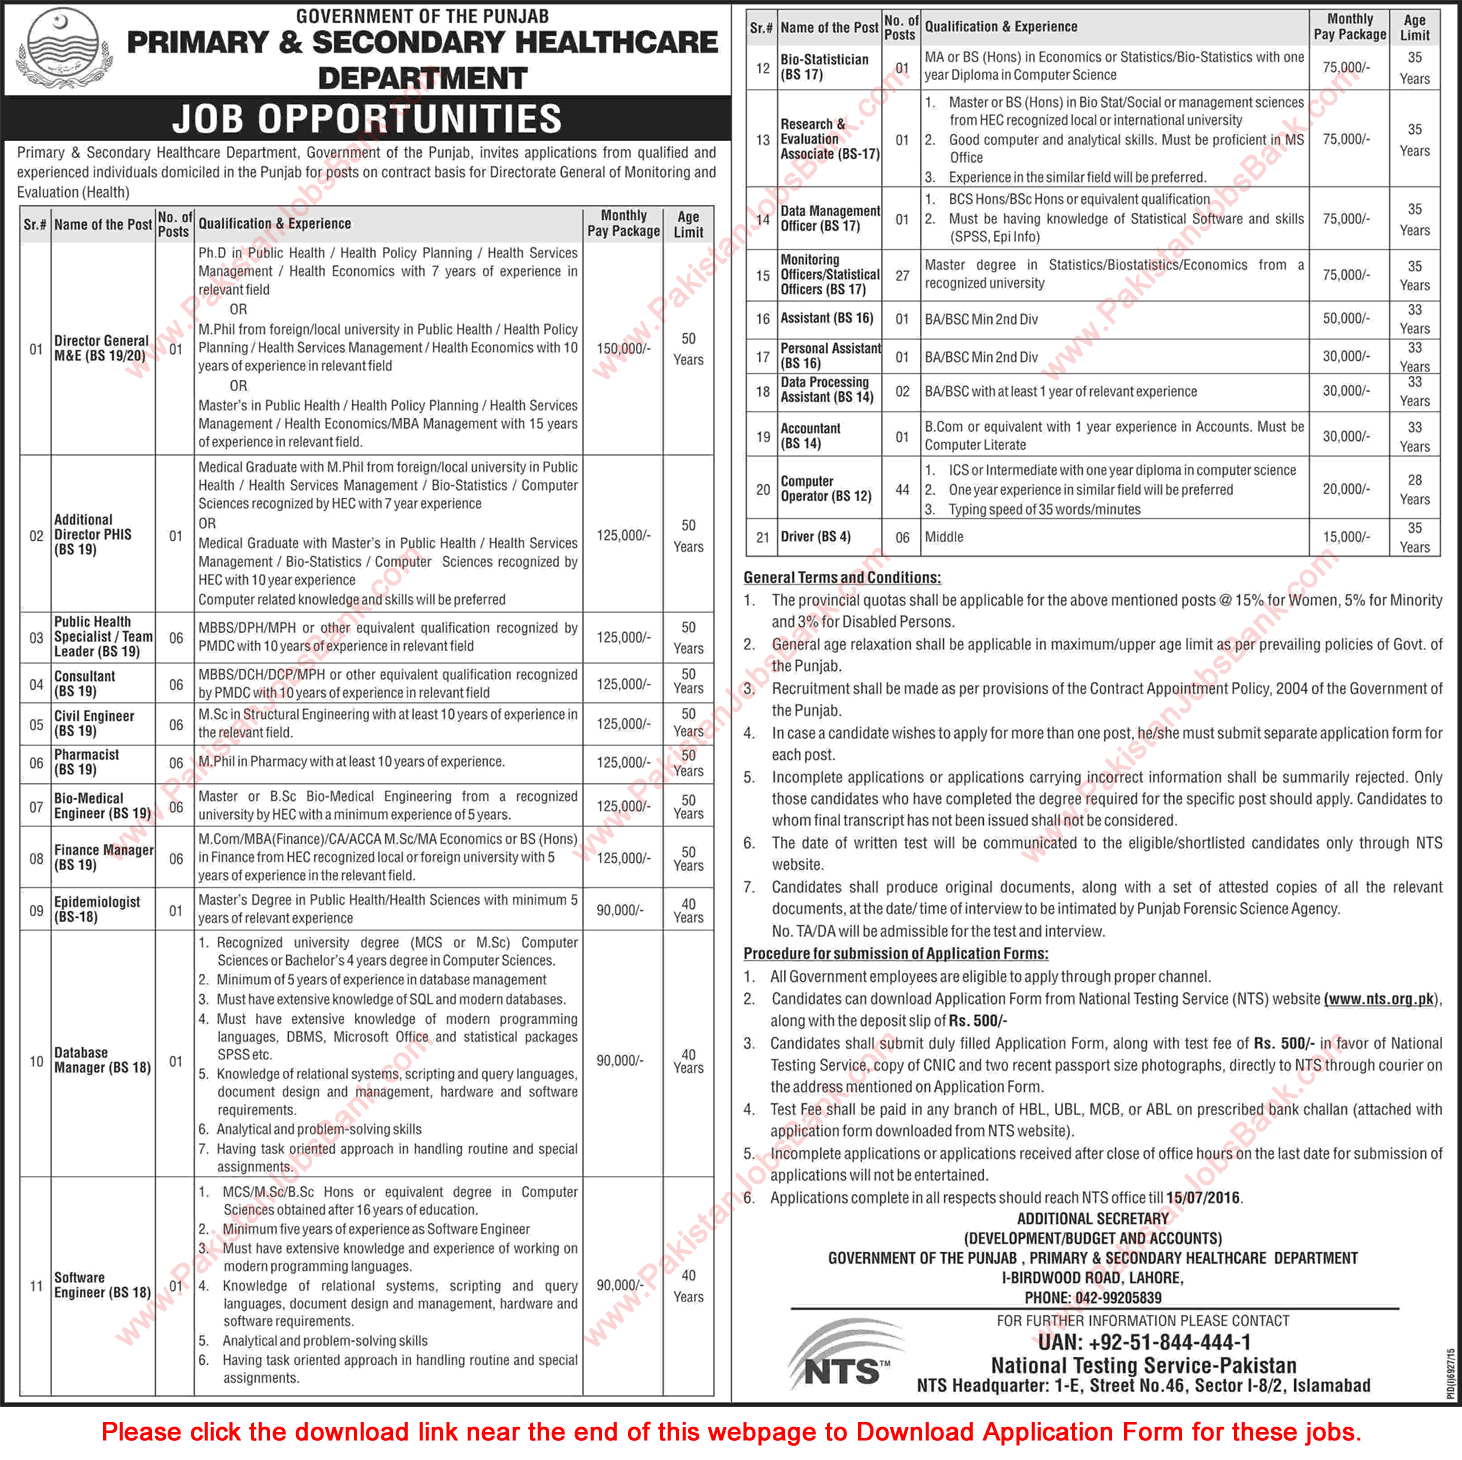 Primary and Secondary Healthcare Department Punjab Jobs June 2016 NTS Application Form Download Latest / New